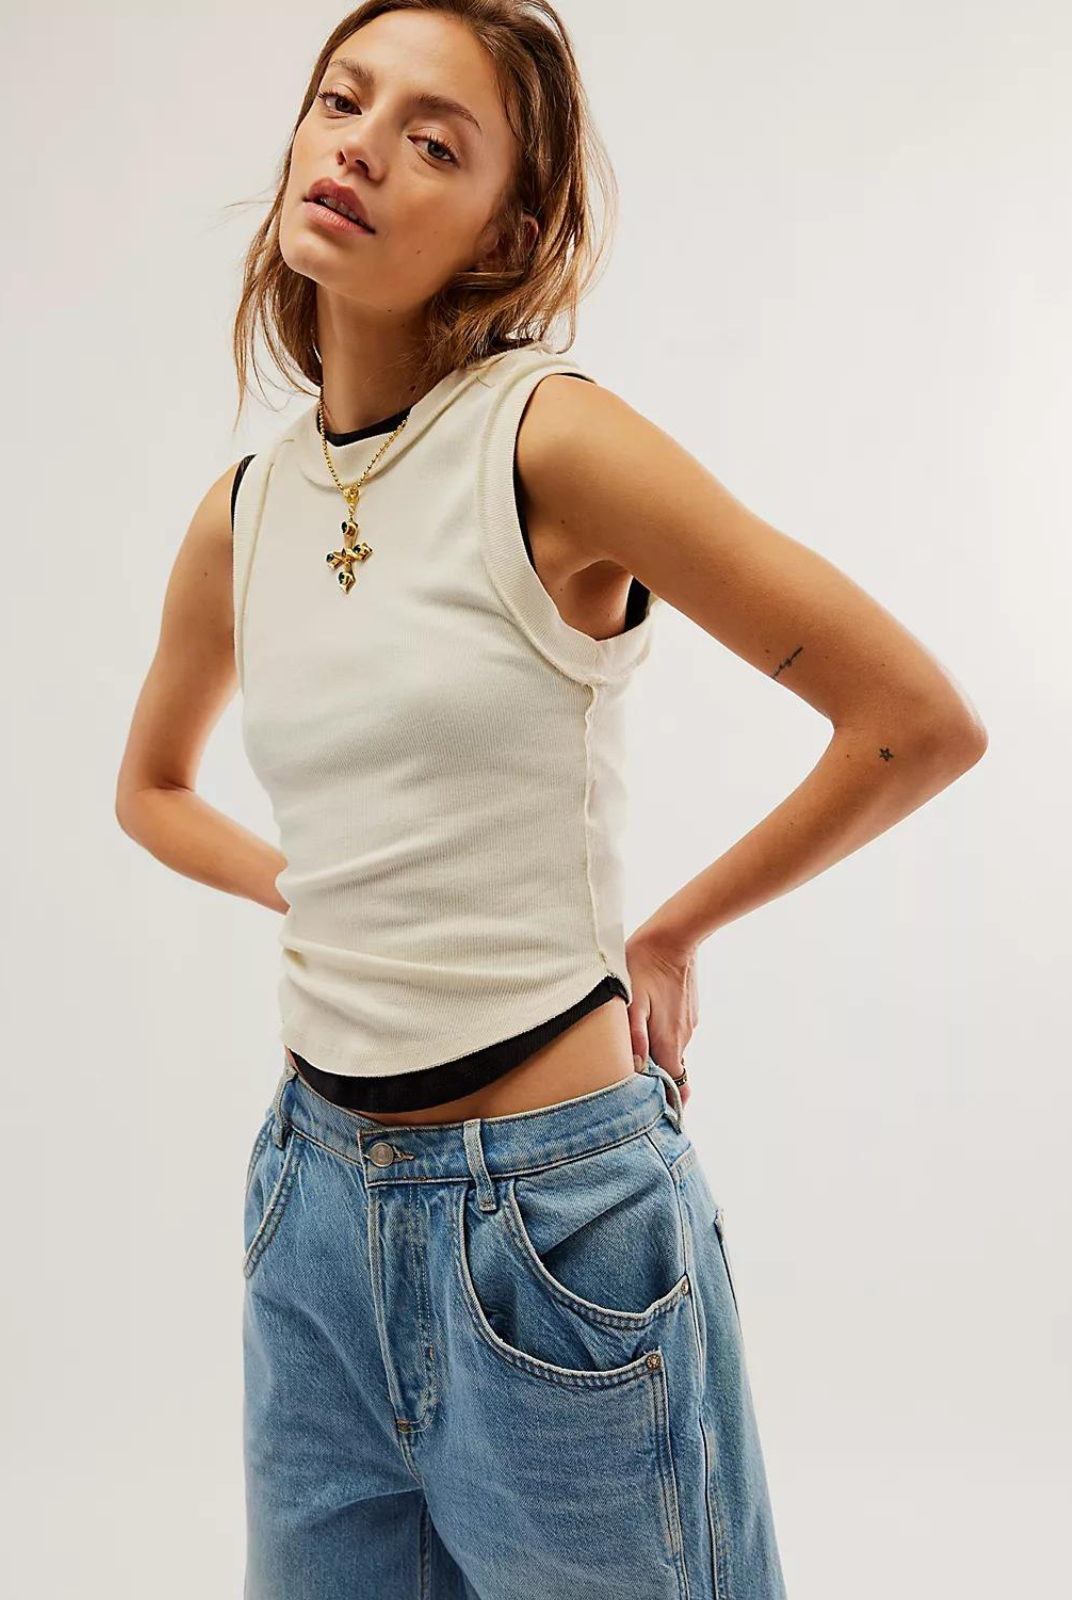 Free People Kate Tee- Ivory The ideal tank-inspired top, this sleeveless tee is featured in an effortless, goes-with-anything design with rounded bottom hem and exposed seaming for a true lived-in look.